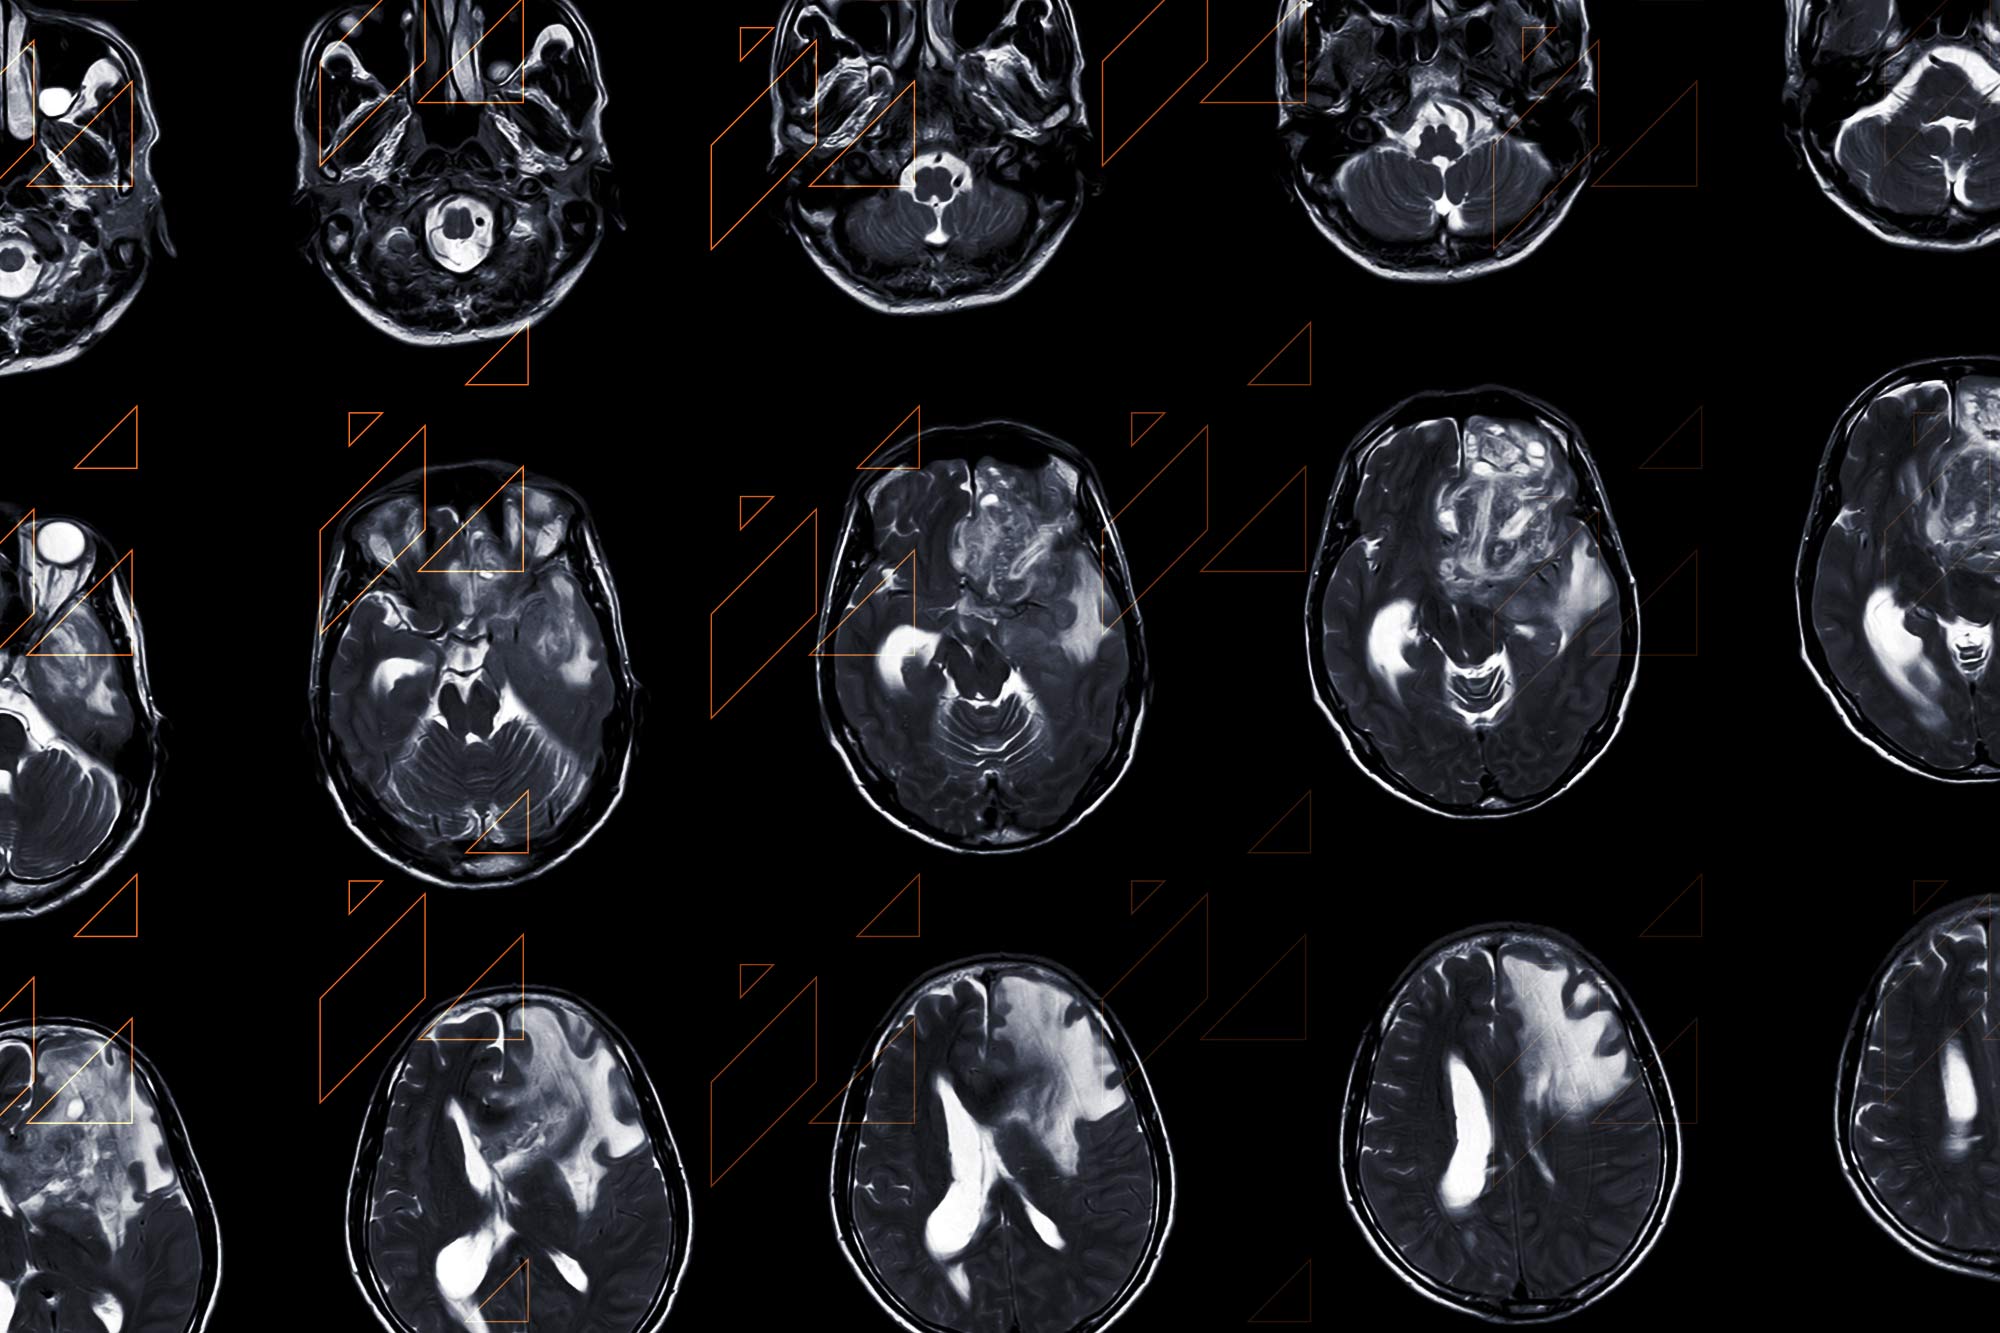 MRI images of a brain with a glioblastoma